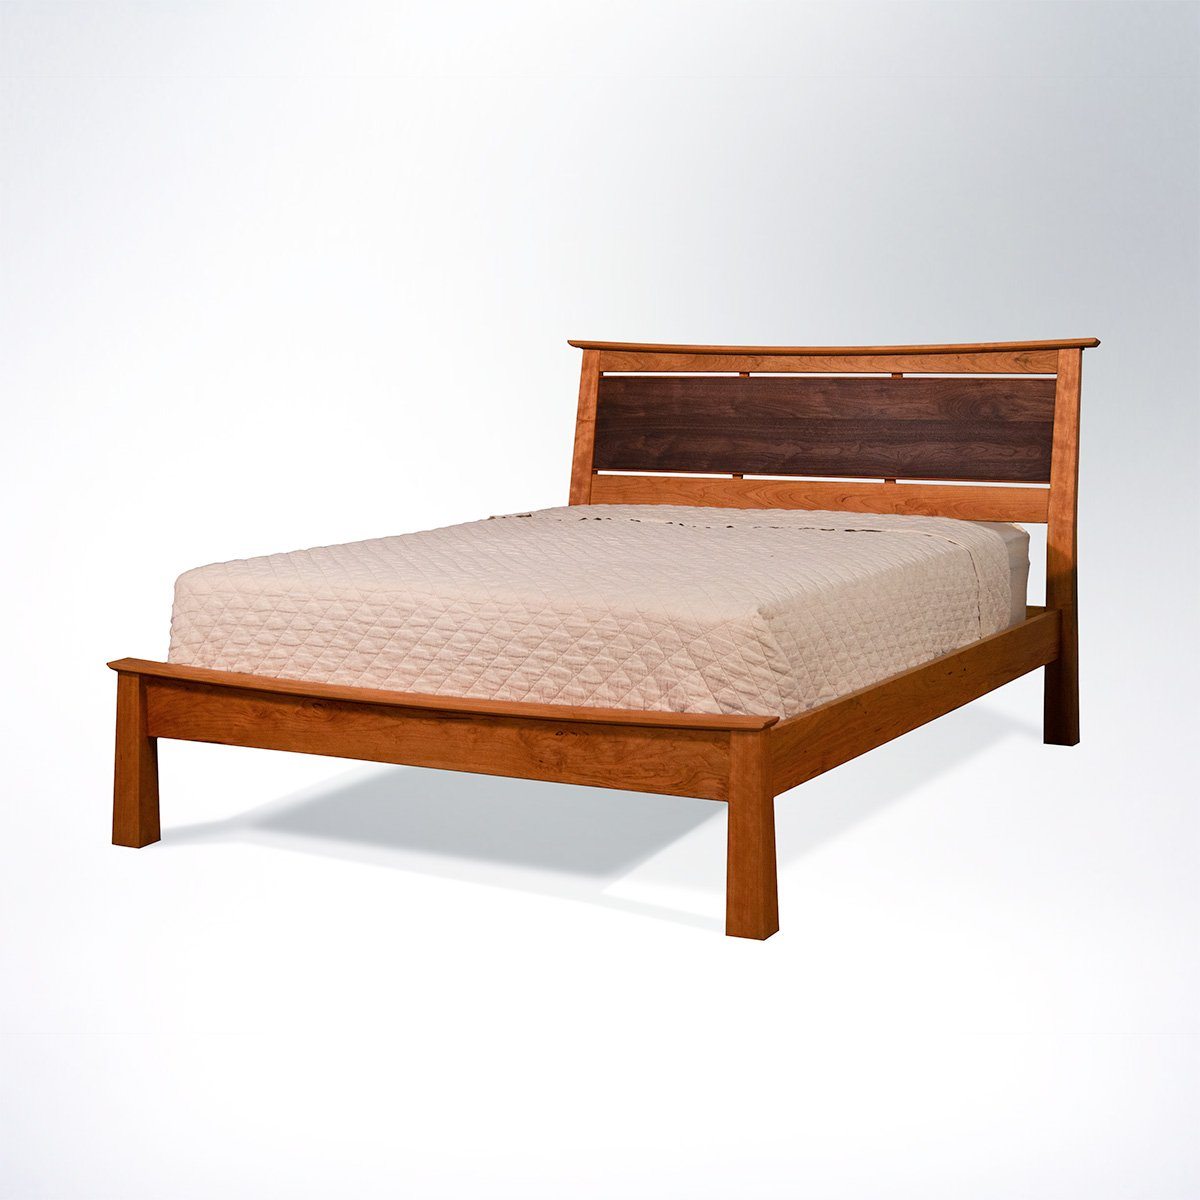 Sold Wood Bed Frame made in USA | Handcrafted wood furniture in Columbus, Ohio